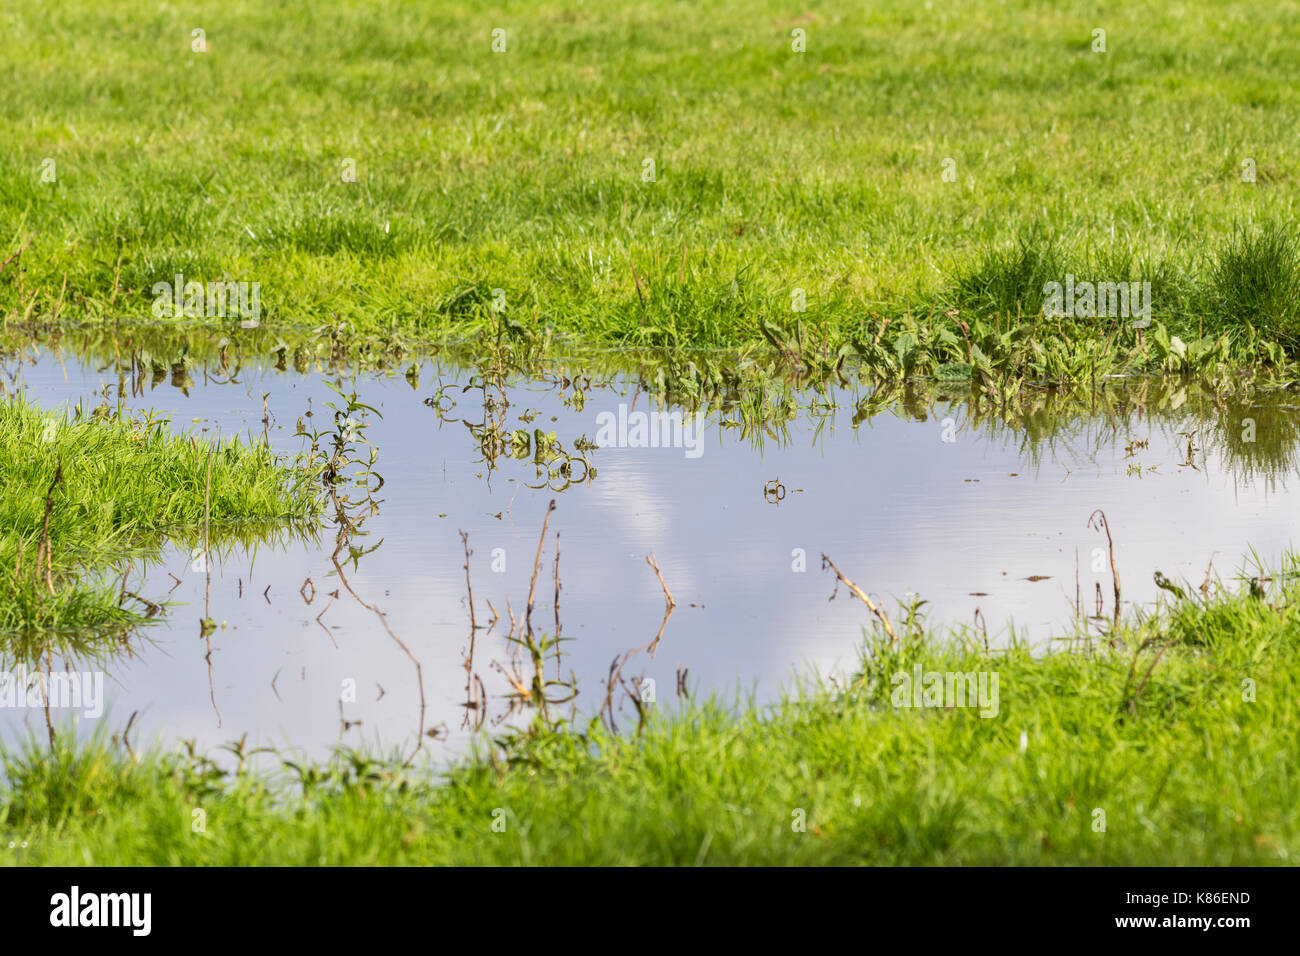 Flood water in a field after heavy rain, with the sky reflection in the flood water. Rain water settled on grass in a field after flooding. Stock Photo